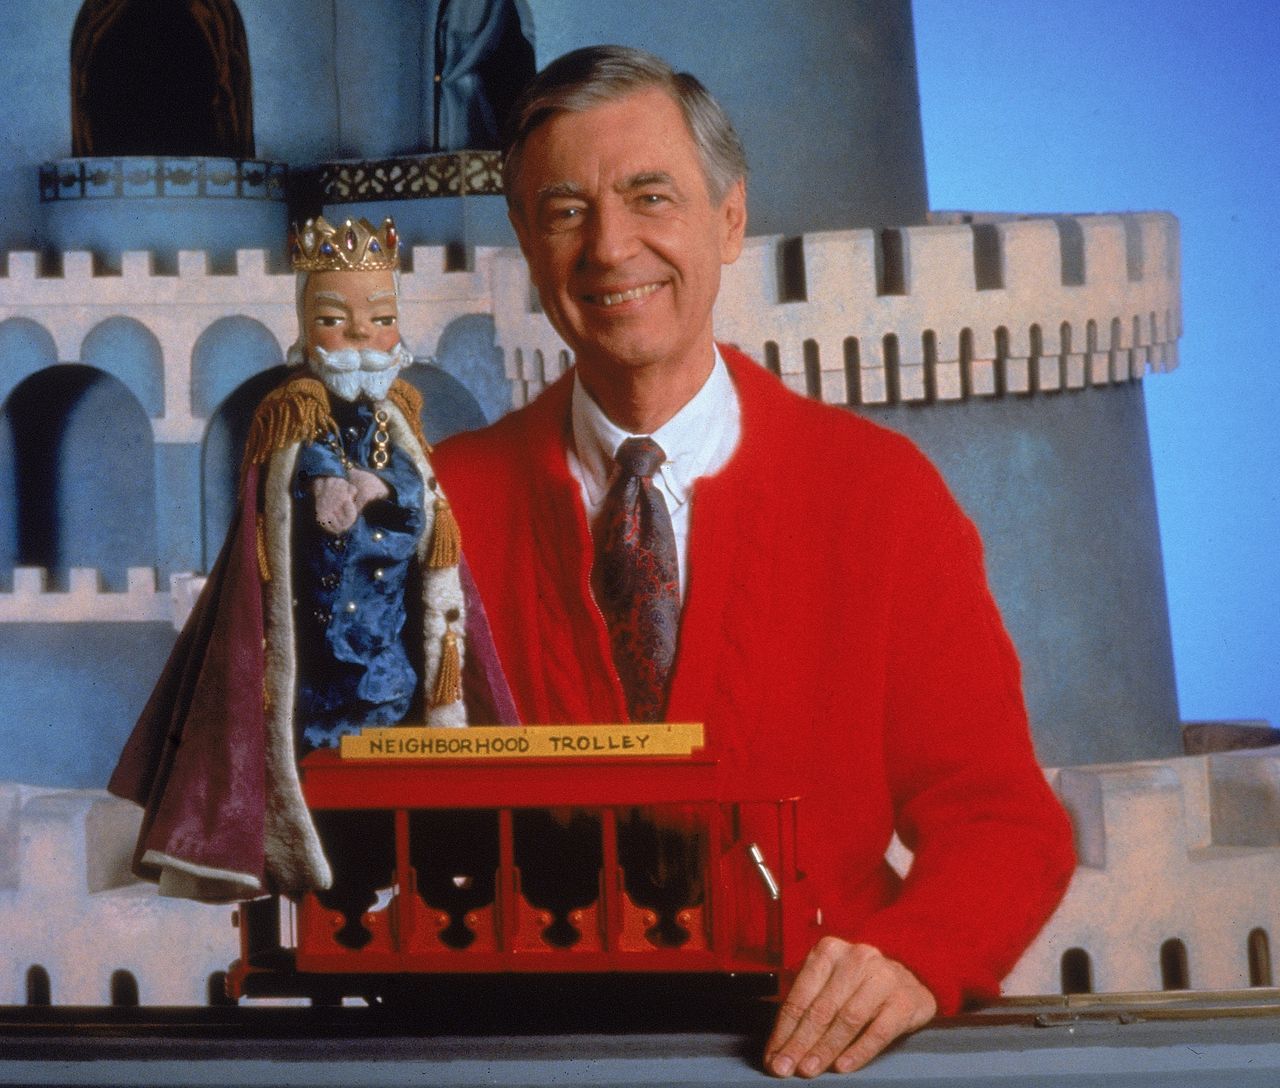 A portrait of Fred Rogers posing with a toy trolley on the set of his television show "Mister Rogers' Neighborhood" in the 1980s.